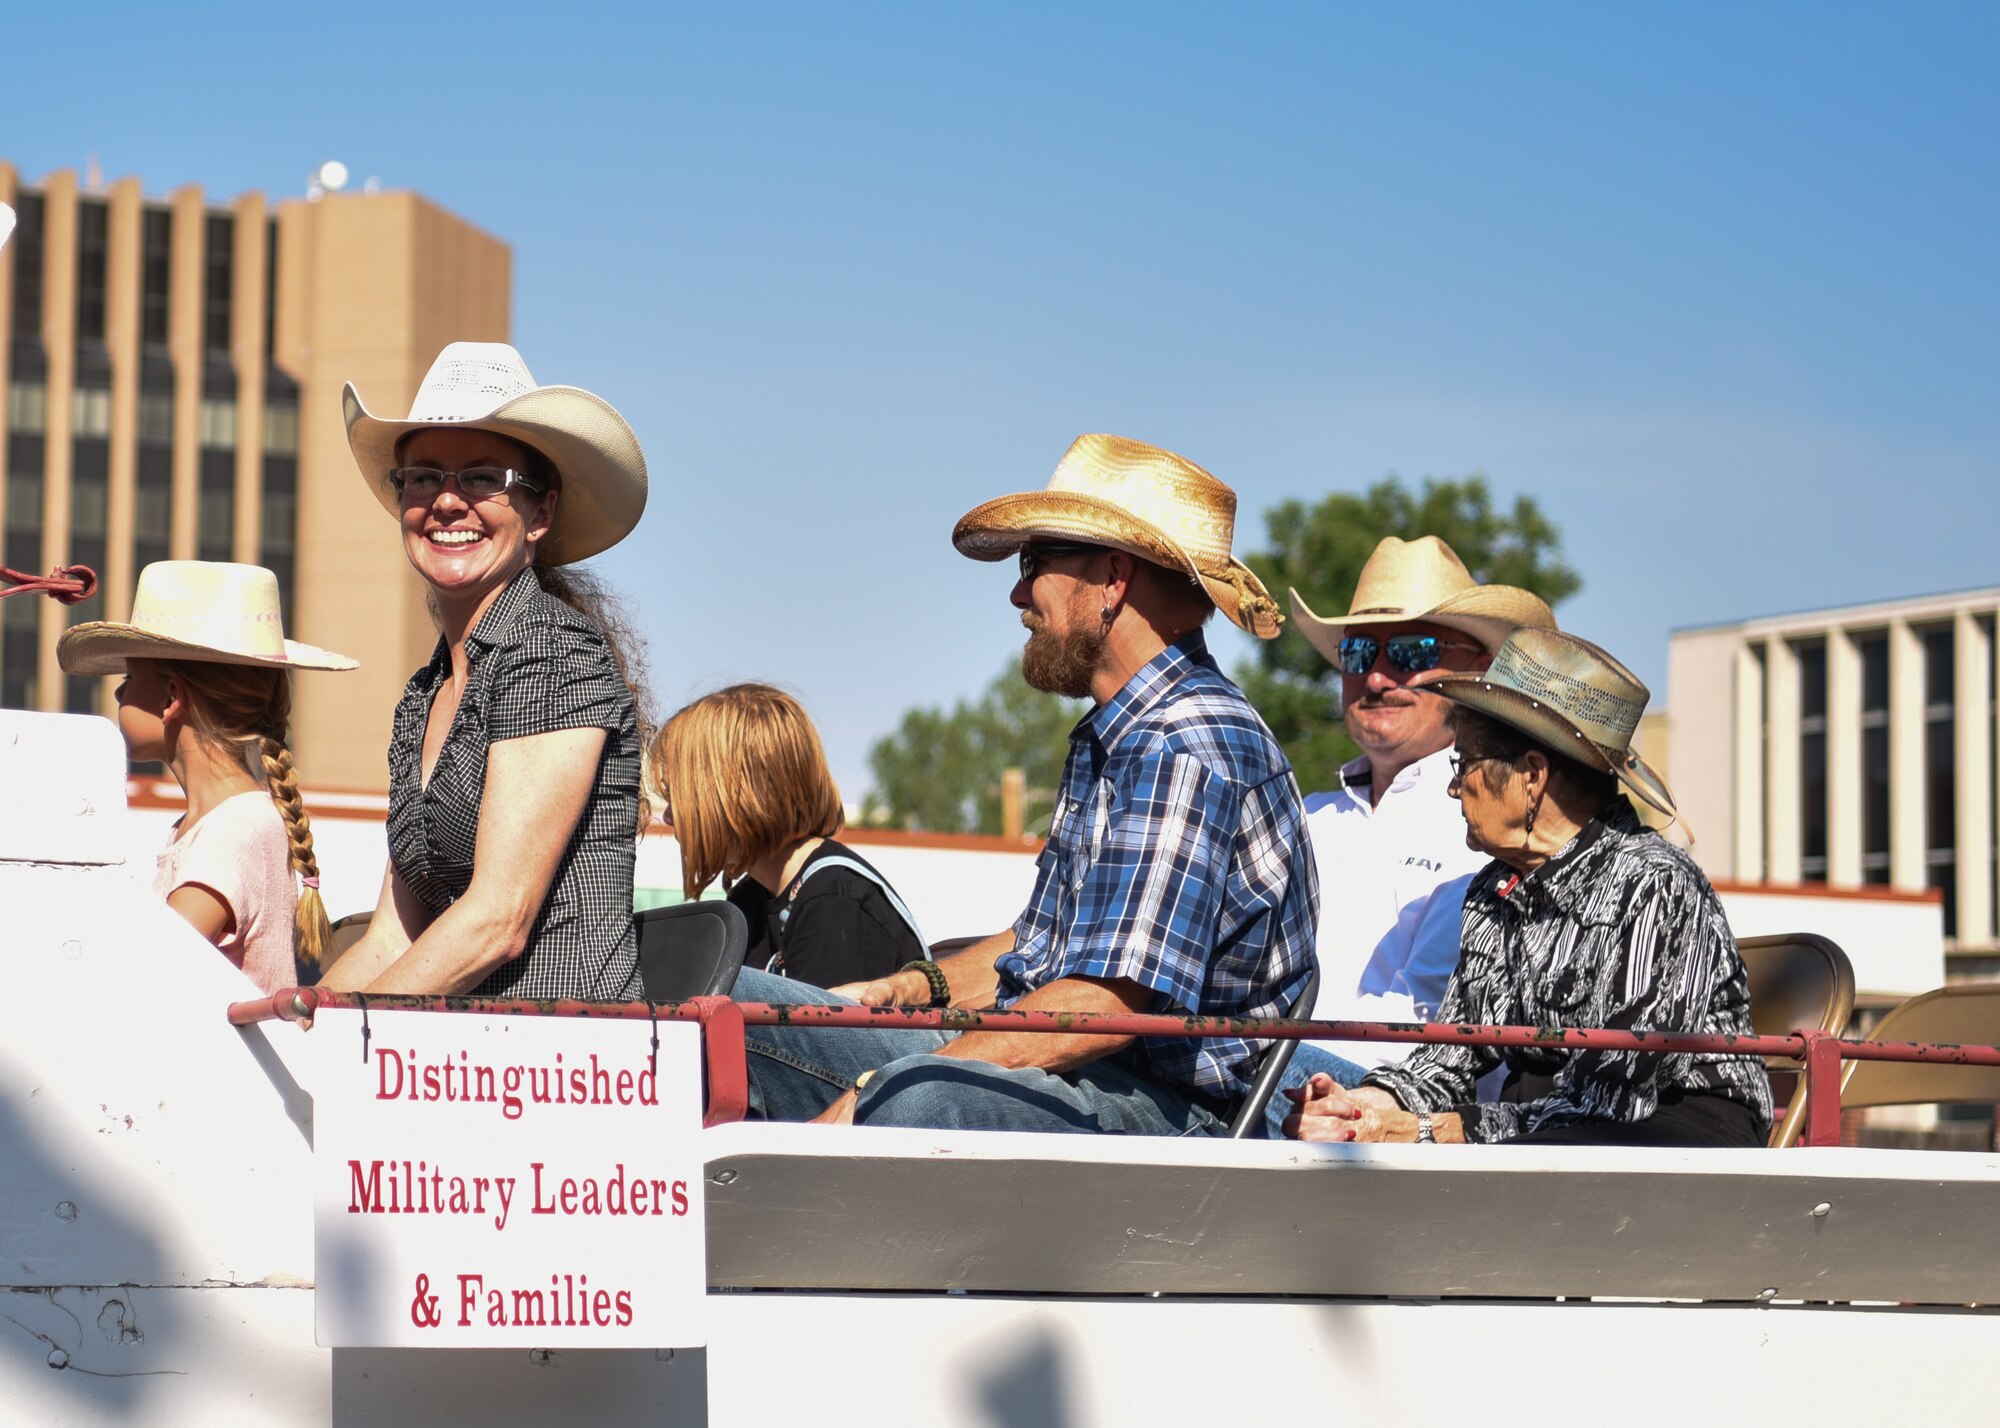 Col. Stacy Jo Huser, 90th Missile Wing commander, smiles/waves at the crowd during the 122nd Cheyenne Frontier Days opening Grand Parade in Cheyenne, Wyo., July 21, 2018. Air Force leadership is honored to participate in the parade to show their support to the community. The F.E. Warren Air Force Base and Cheyenne communities came together to celebrate the CFD rodeo and festival, which runs from July 20-29. (U.S. Air Force photo by Airman 1st Class Braydon Williams)